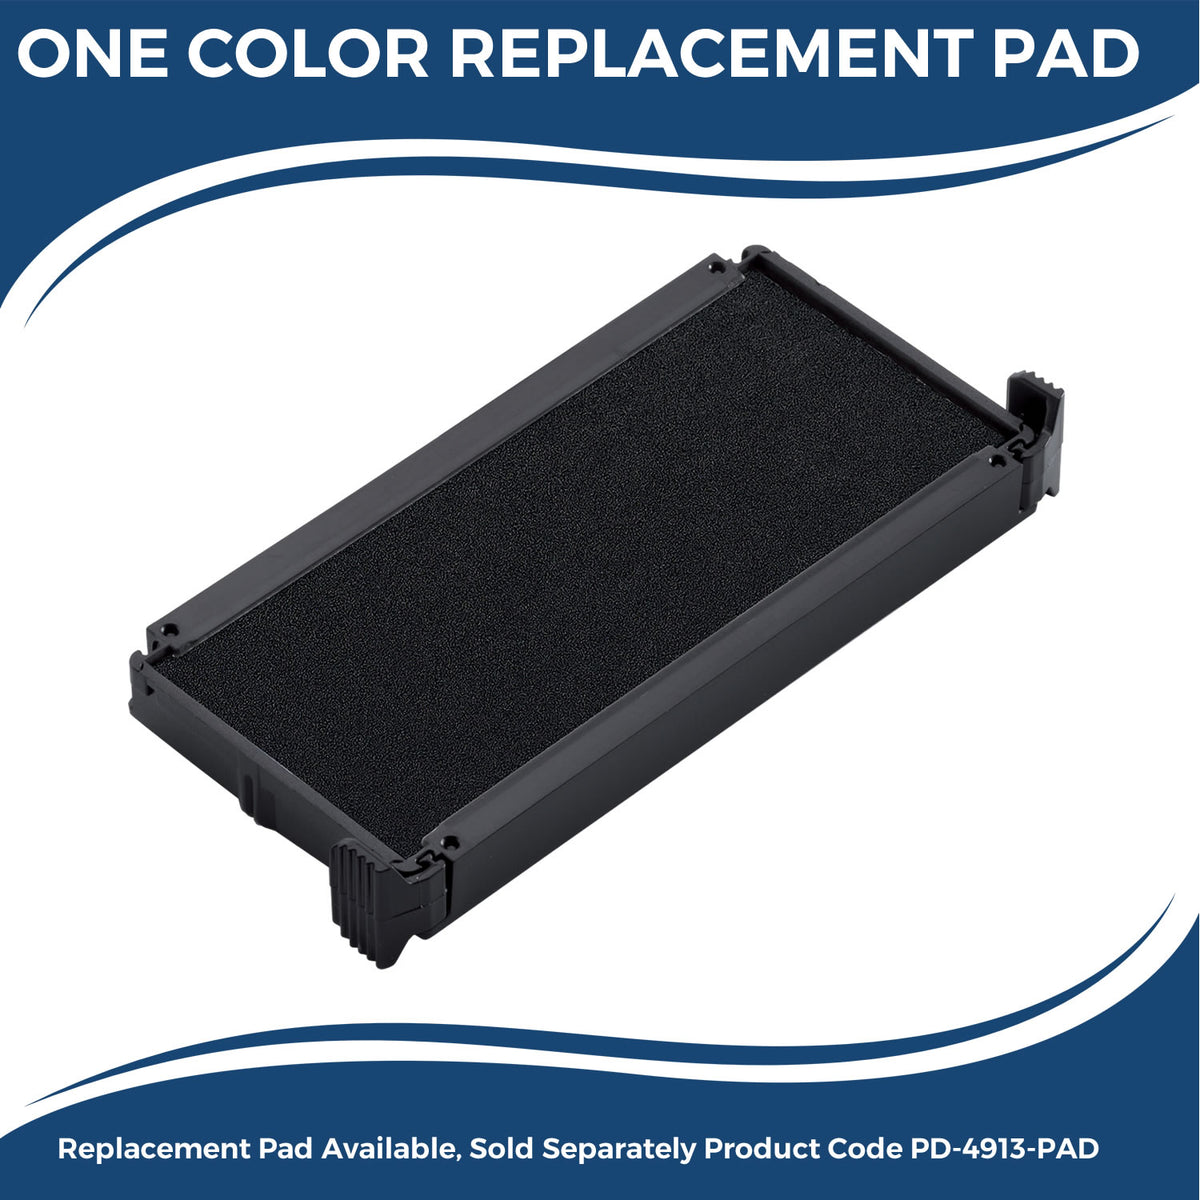 Large Self-Inking Nice Work Stamp 5599S Large Replacment Pad